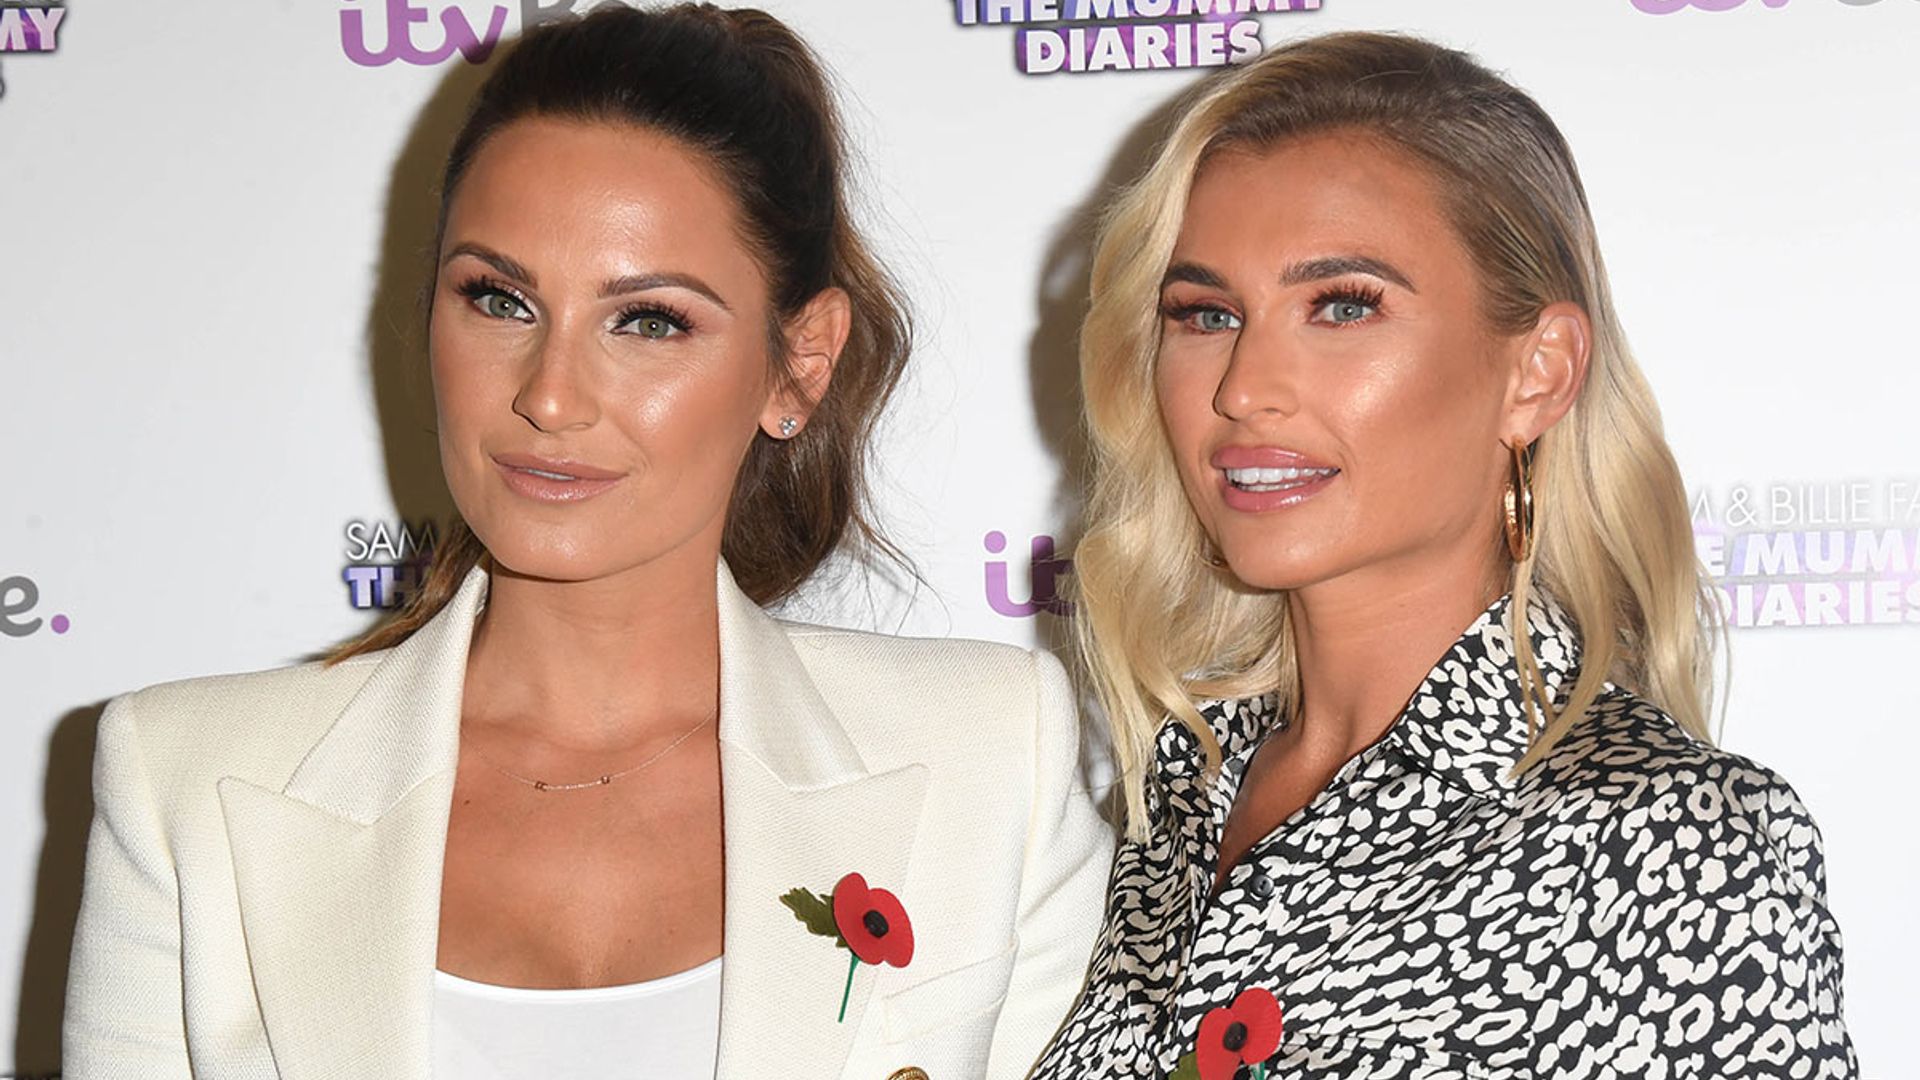 Sam Faiers reflects on her sister Billie's Maldives wedding – and plans for her own